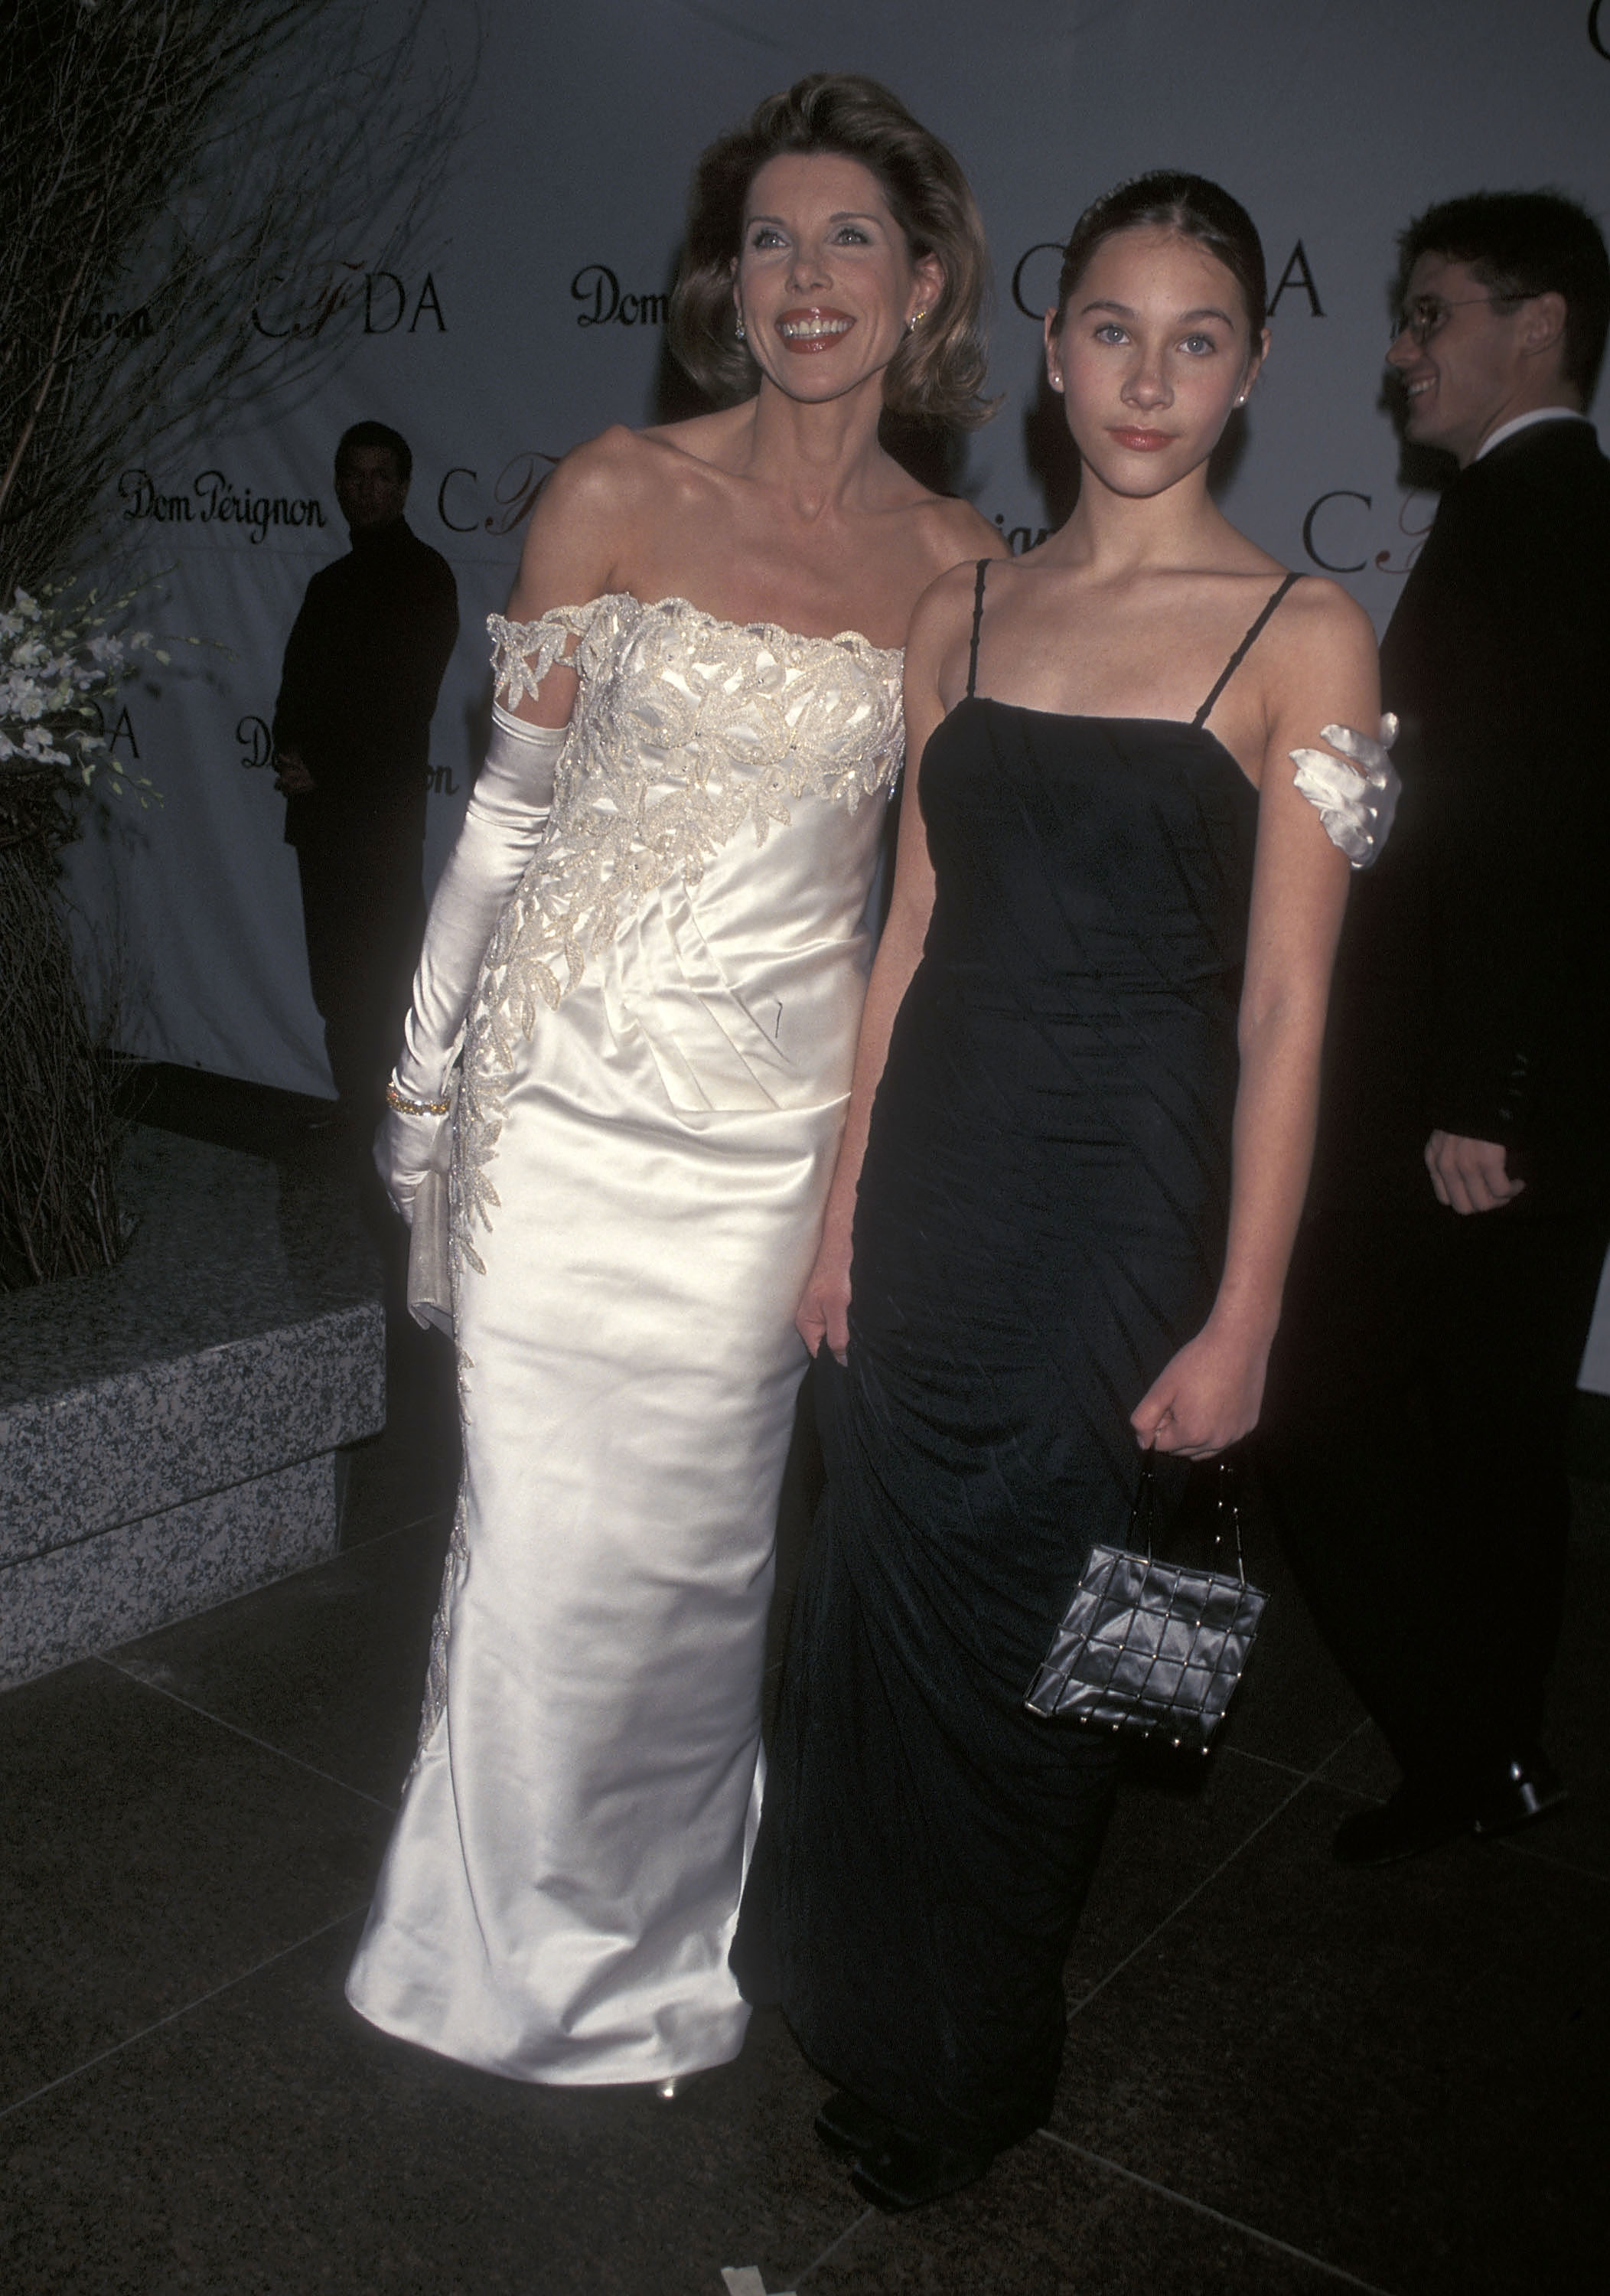 Christine Baranski and Isabel Cowles at the 17th Annual CFDA Awards on February 8, 1998, in New York City. | Source: Getty Images